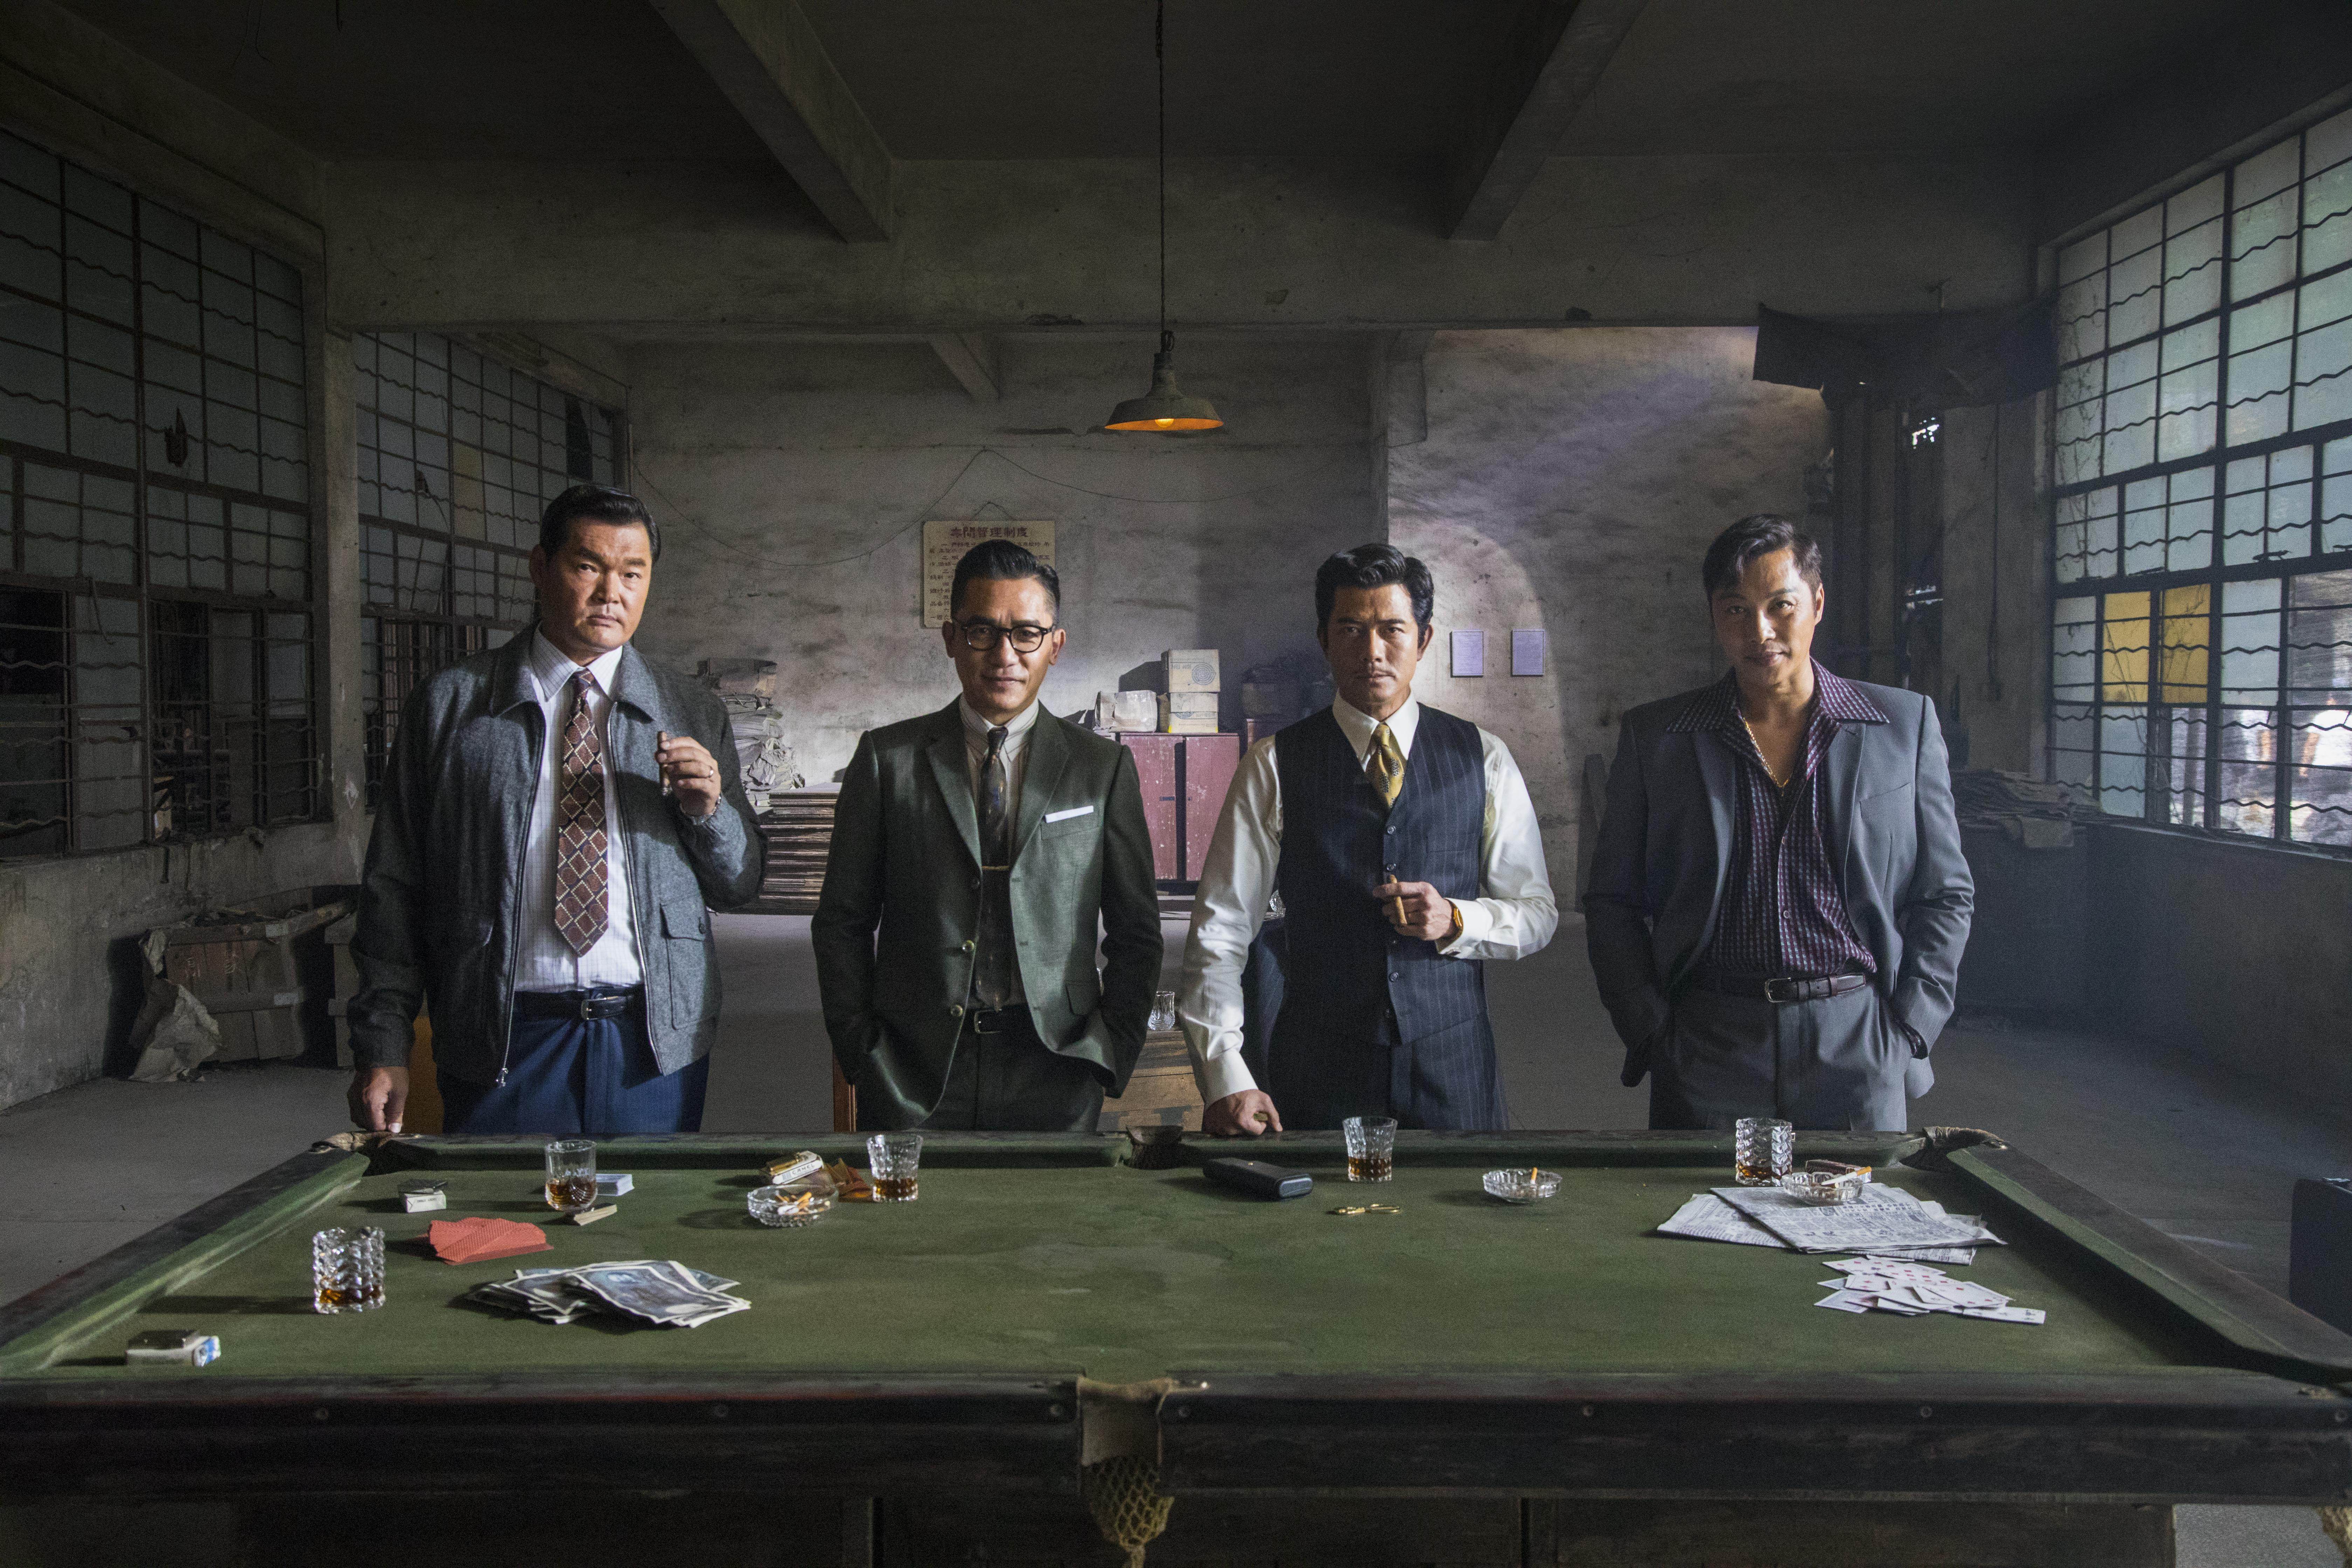 (From left) Michael Chow, Tony Leung, Aaron Kwok and Patrick Tam in a still from Where the Wind Blows.